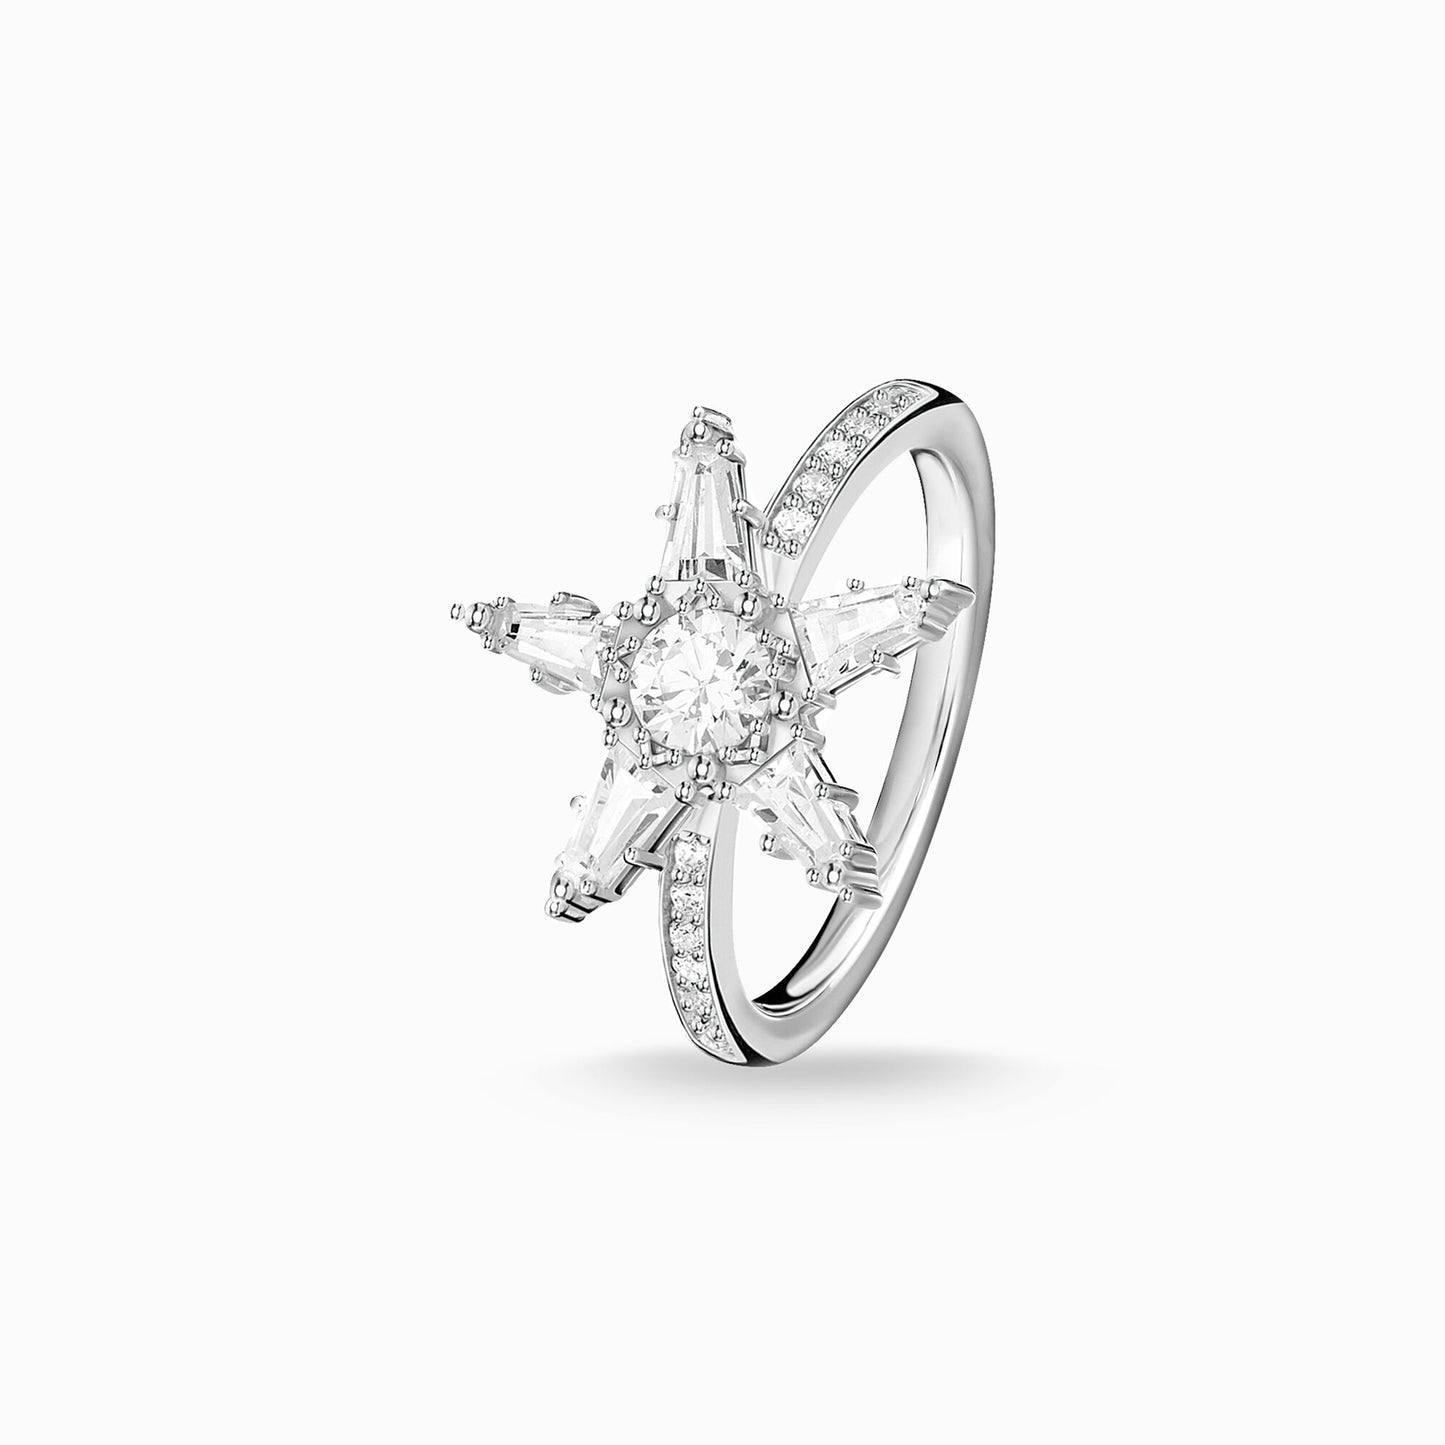 Thomas Sabo Sterling Silver Cubic Zirconia Large Star Ring Size 54 TR2271-051-14